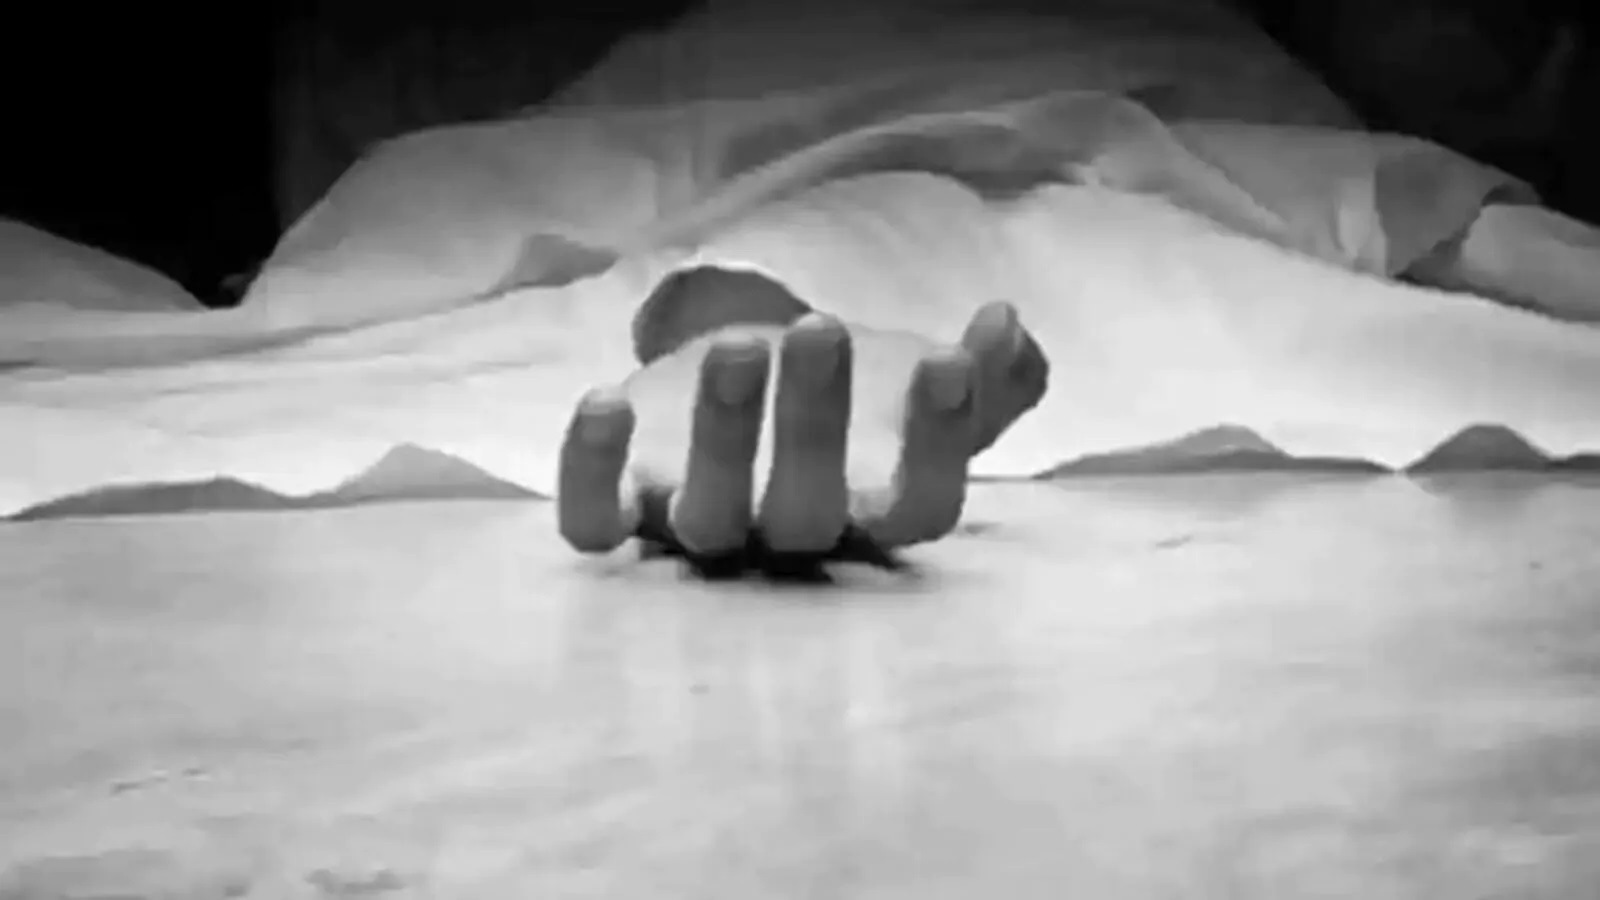 Sitapur tragedy: Four of a family, including 2 infants, die due to